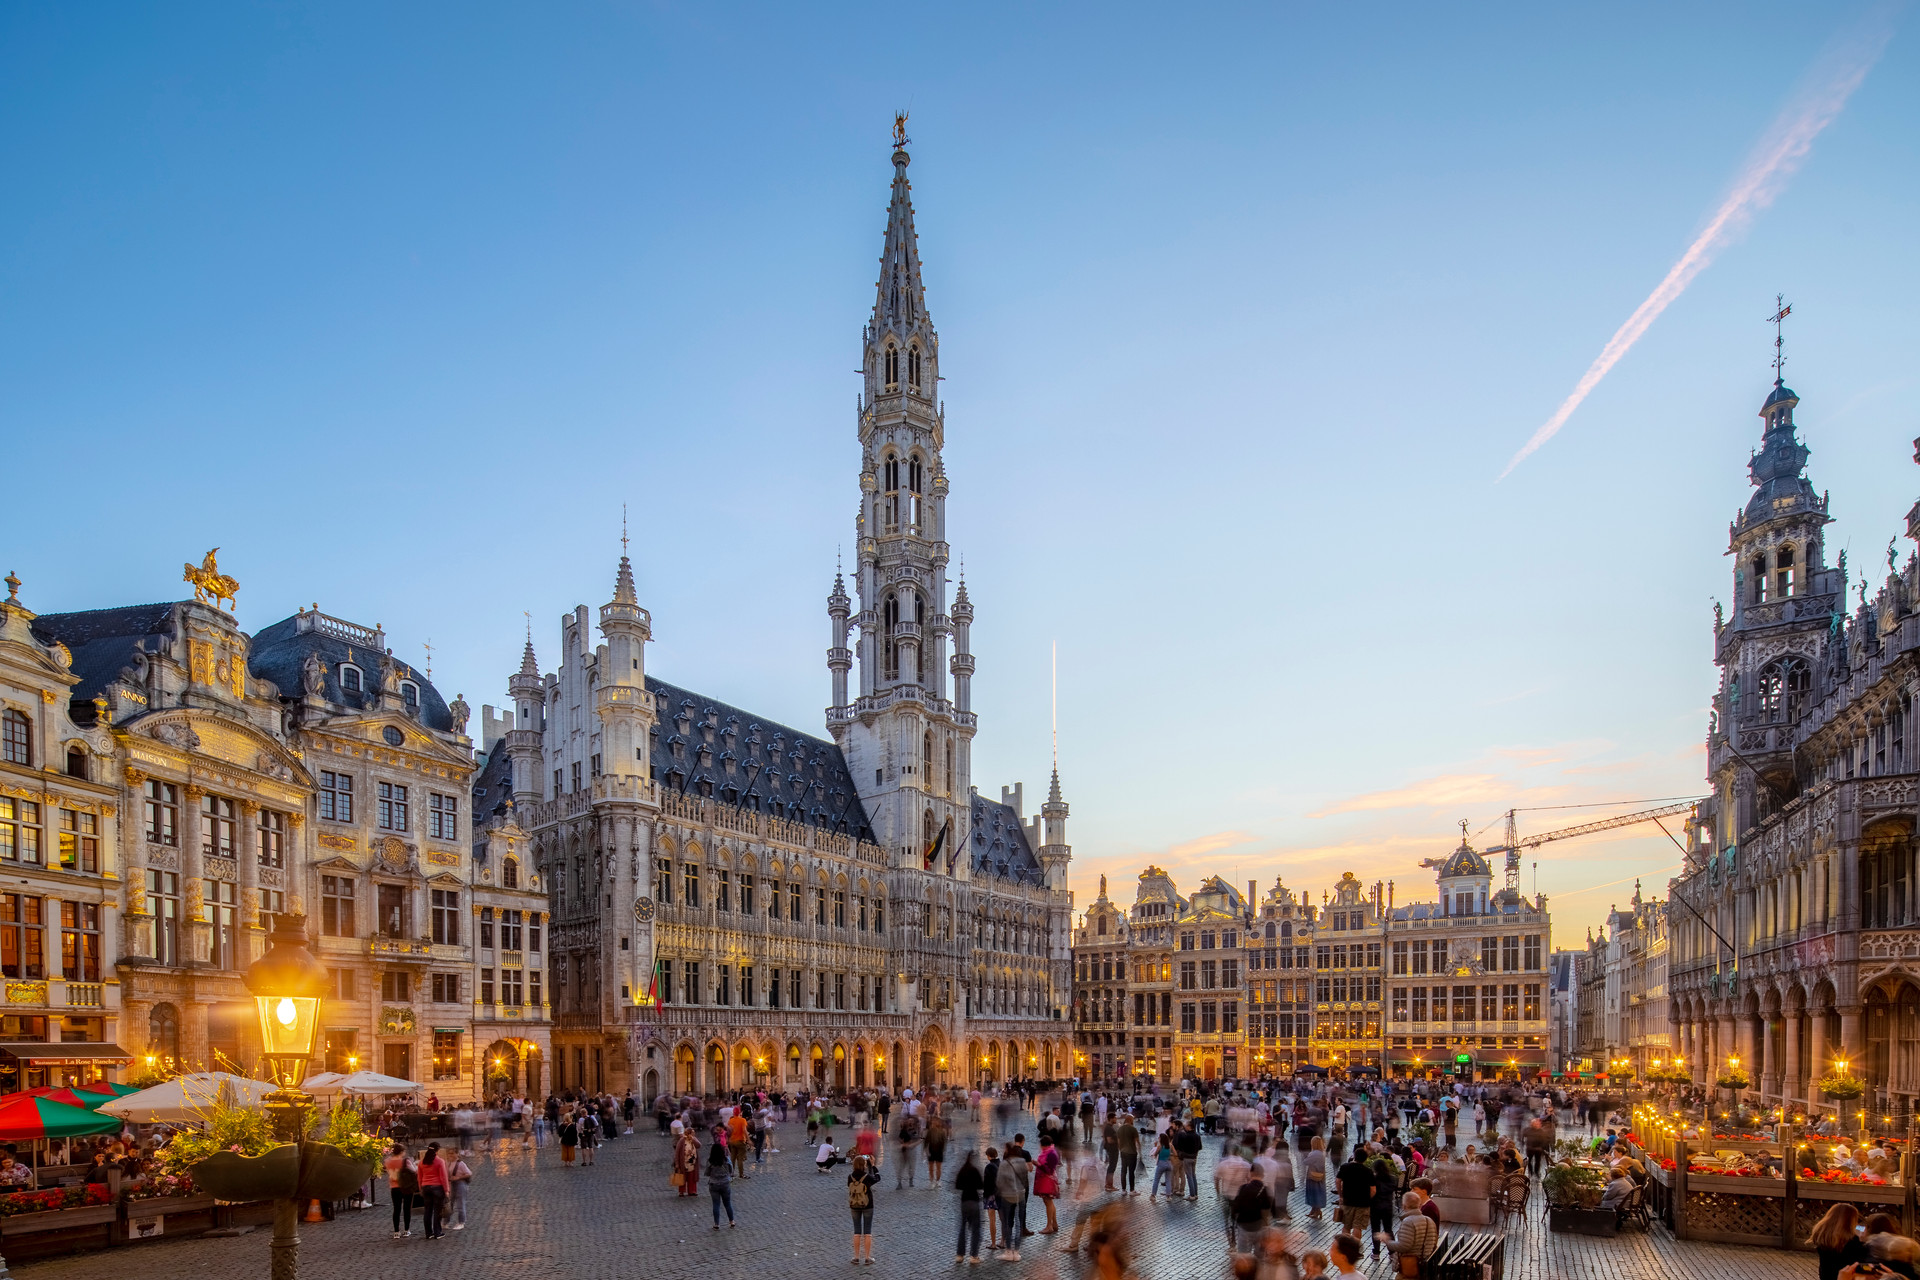 Grand-Place/ Grote Markt in Brussels, Belgium. Photo: Jean-Michel Byl.